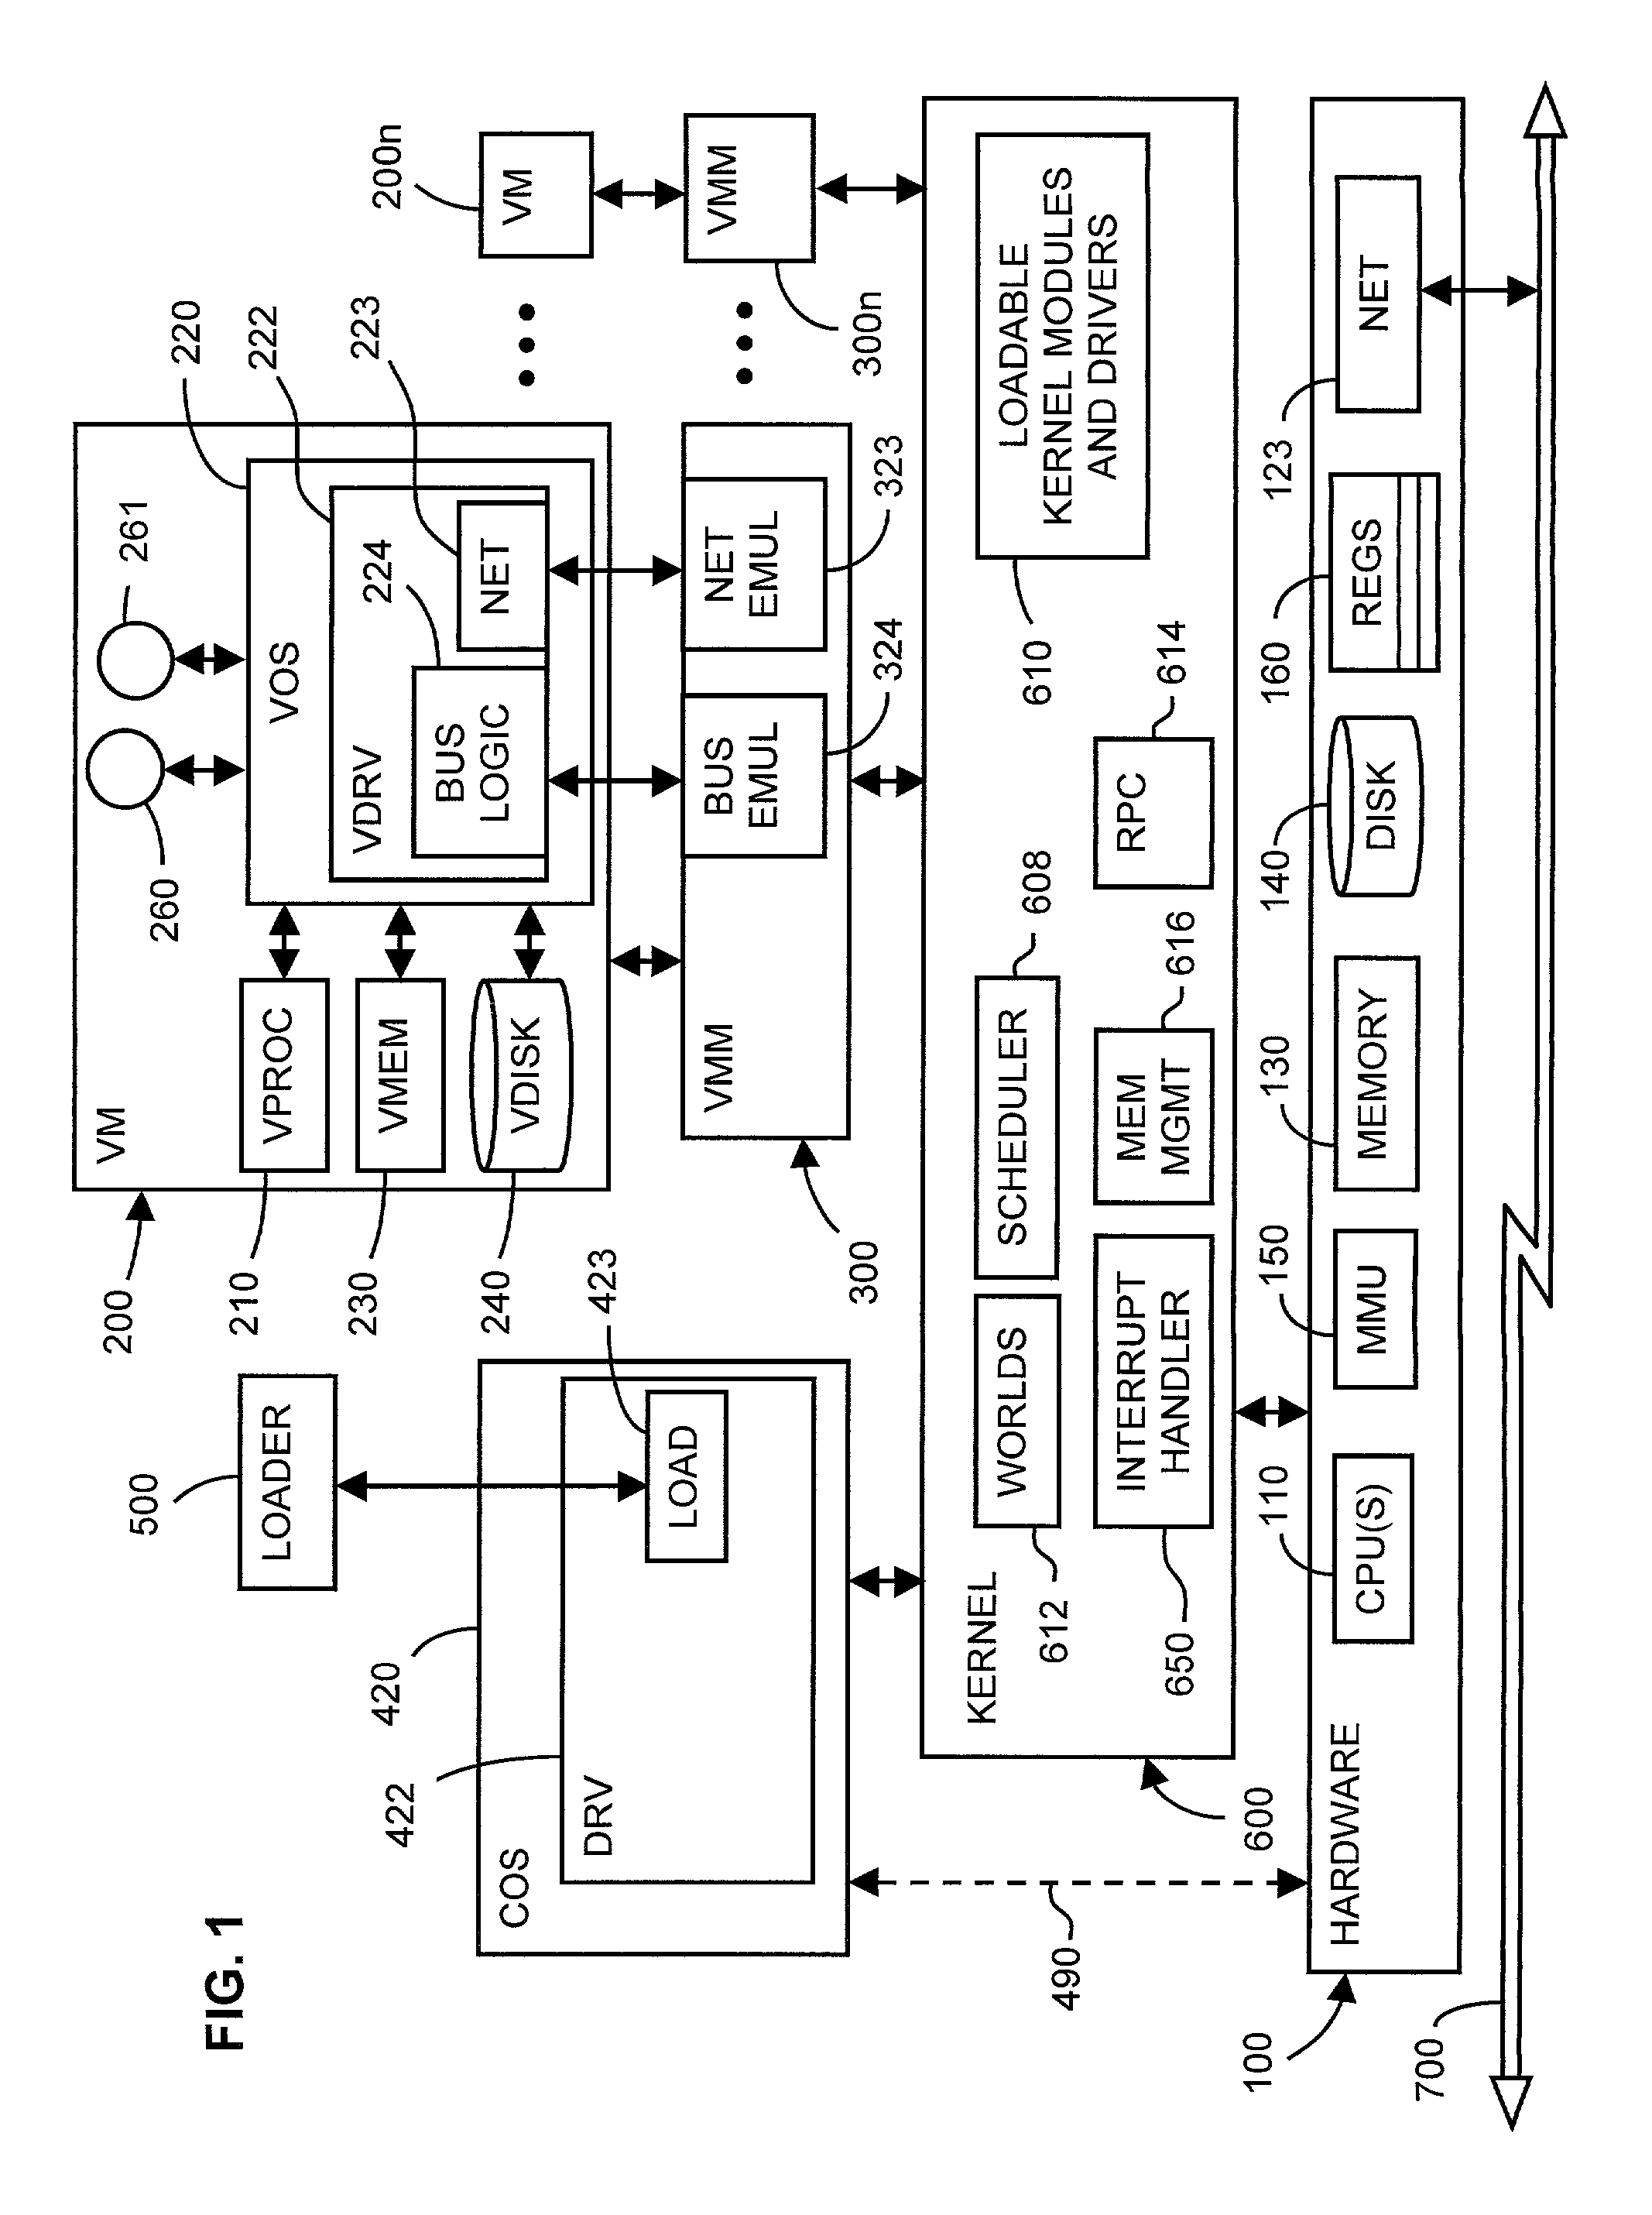 Computer configuration for resource management in systems including a virtual machine